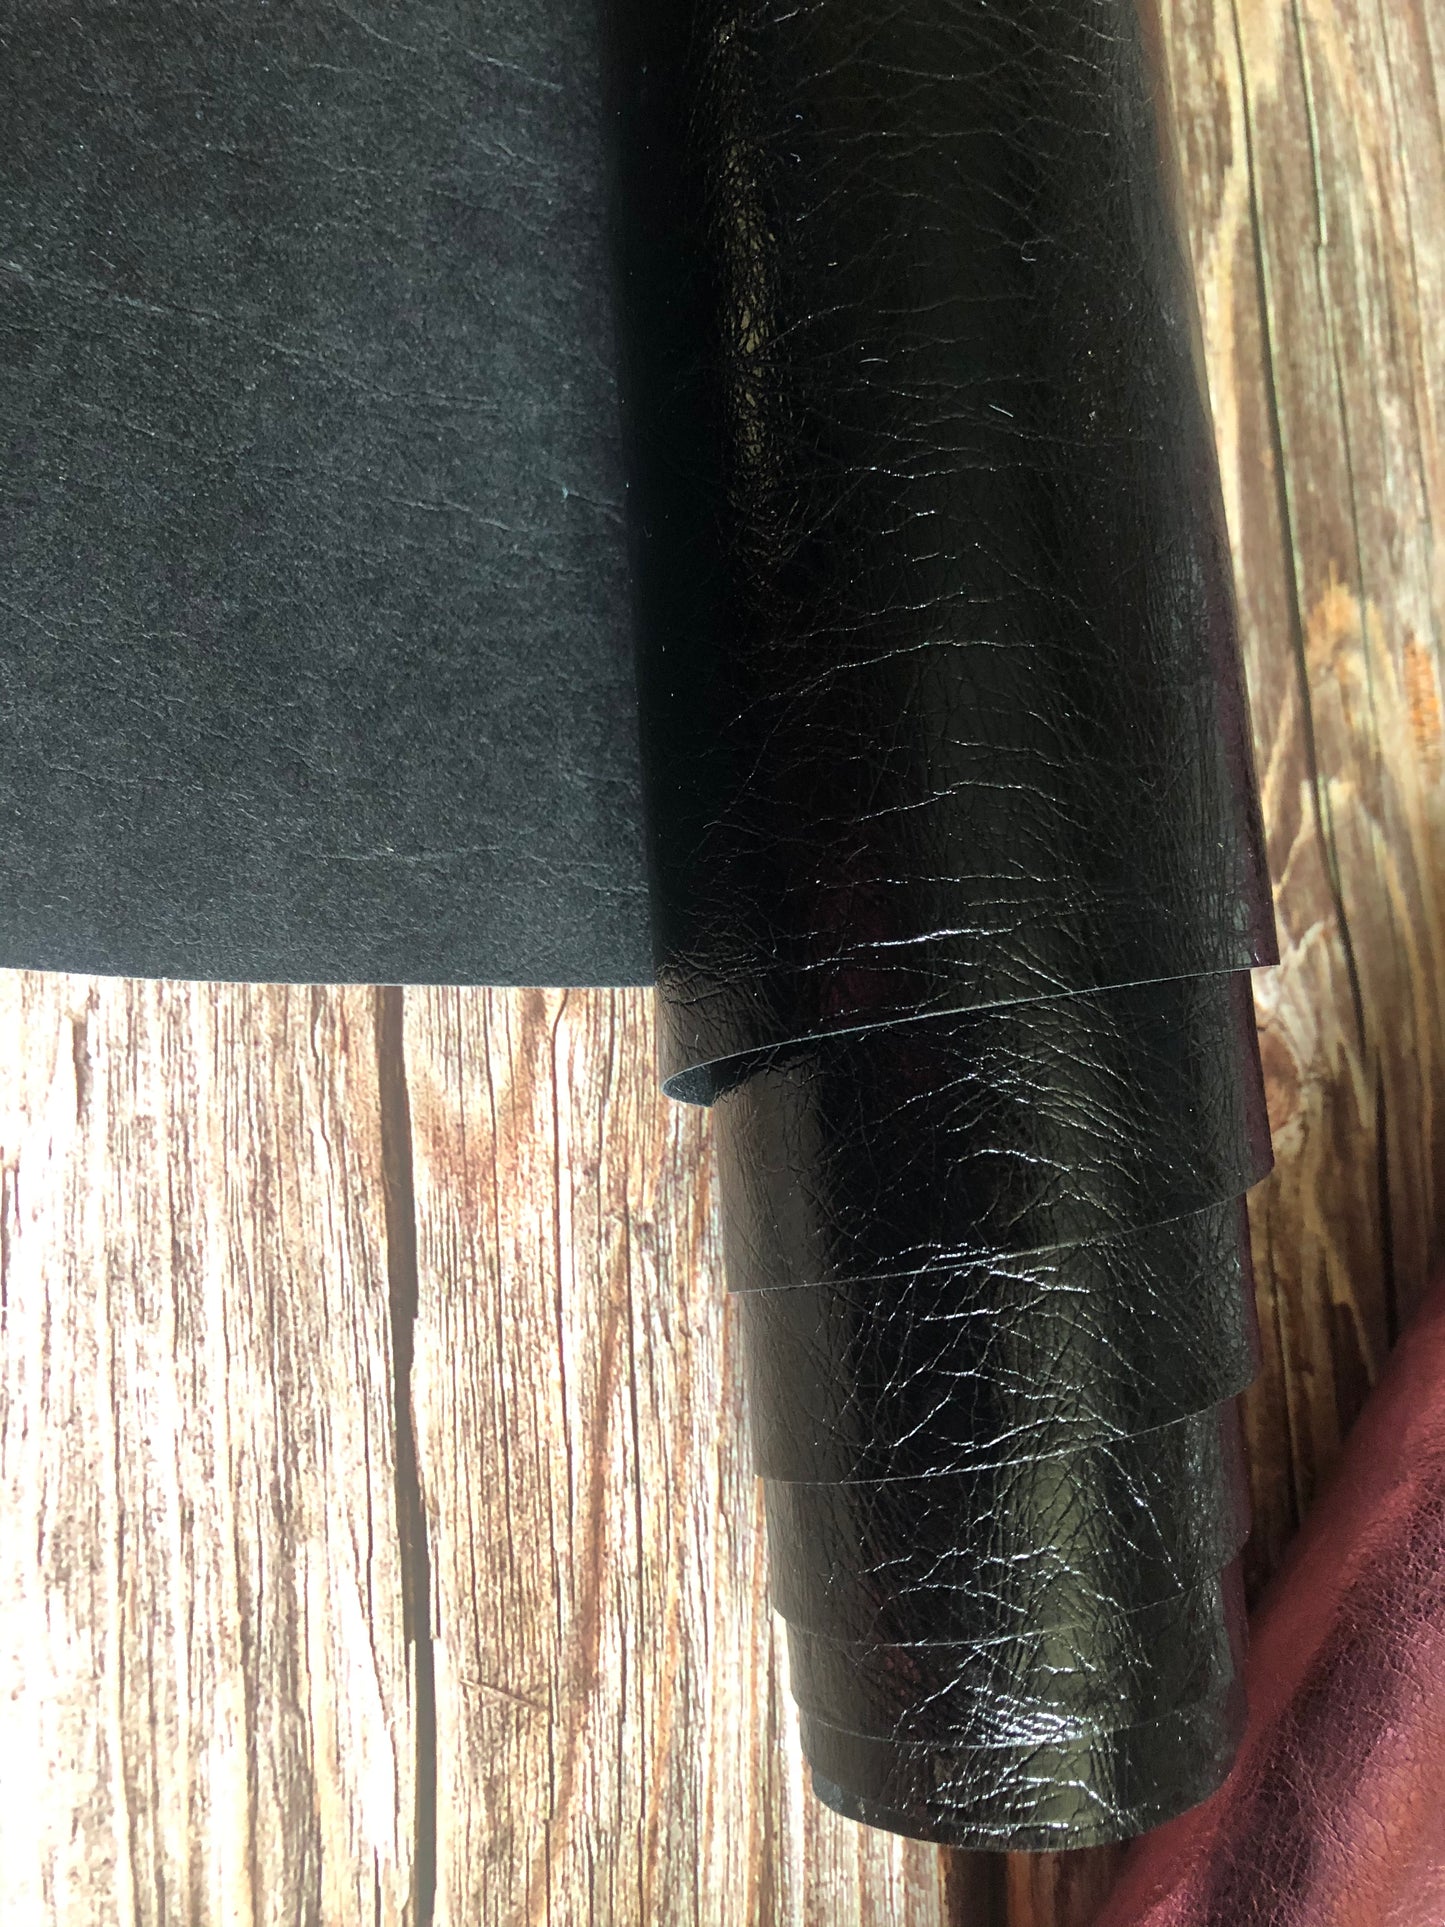 Kraft paper fabric, pre-washed kraft paper, laminated paper leather, environmentally friendly material, printable fabric, vegan leather